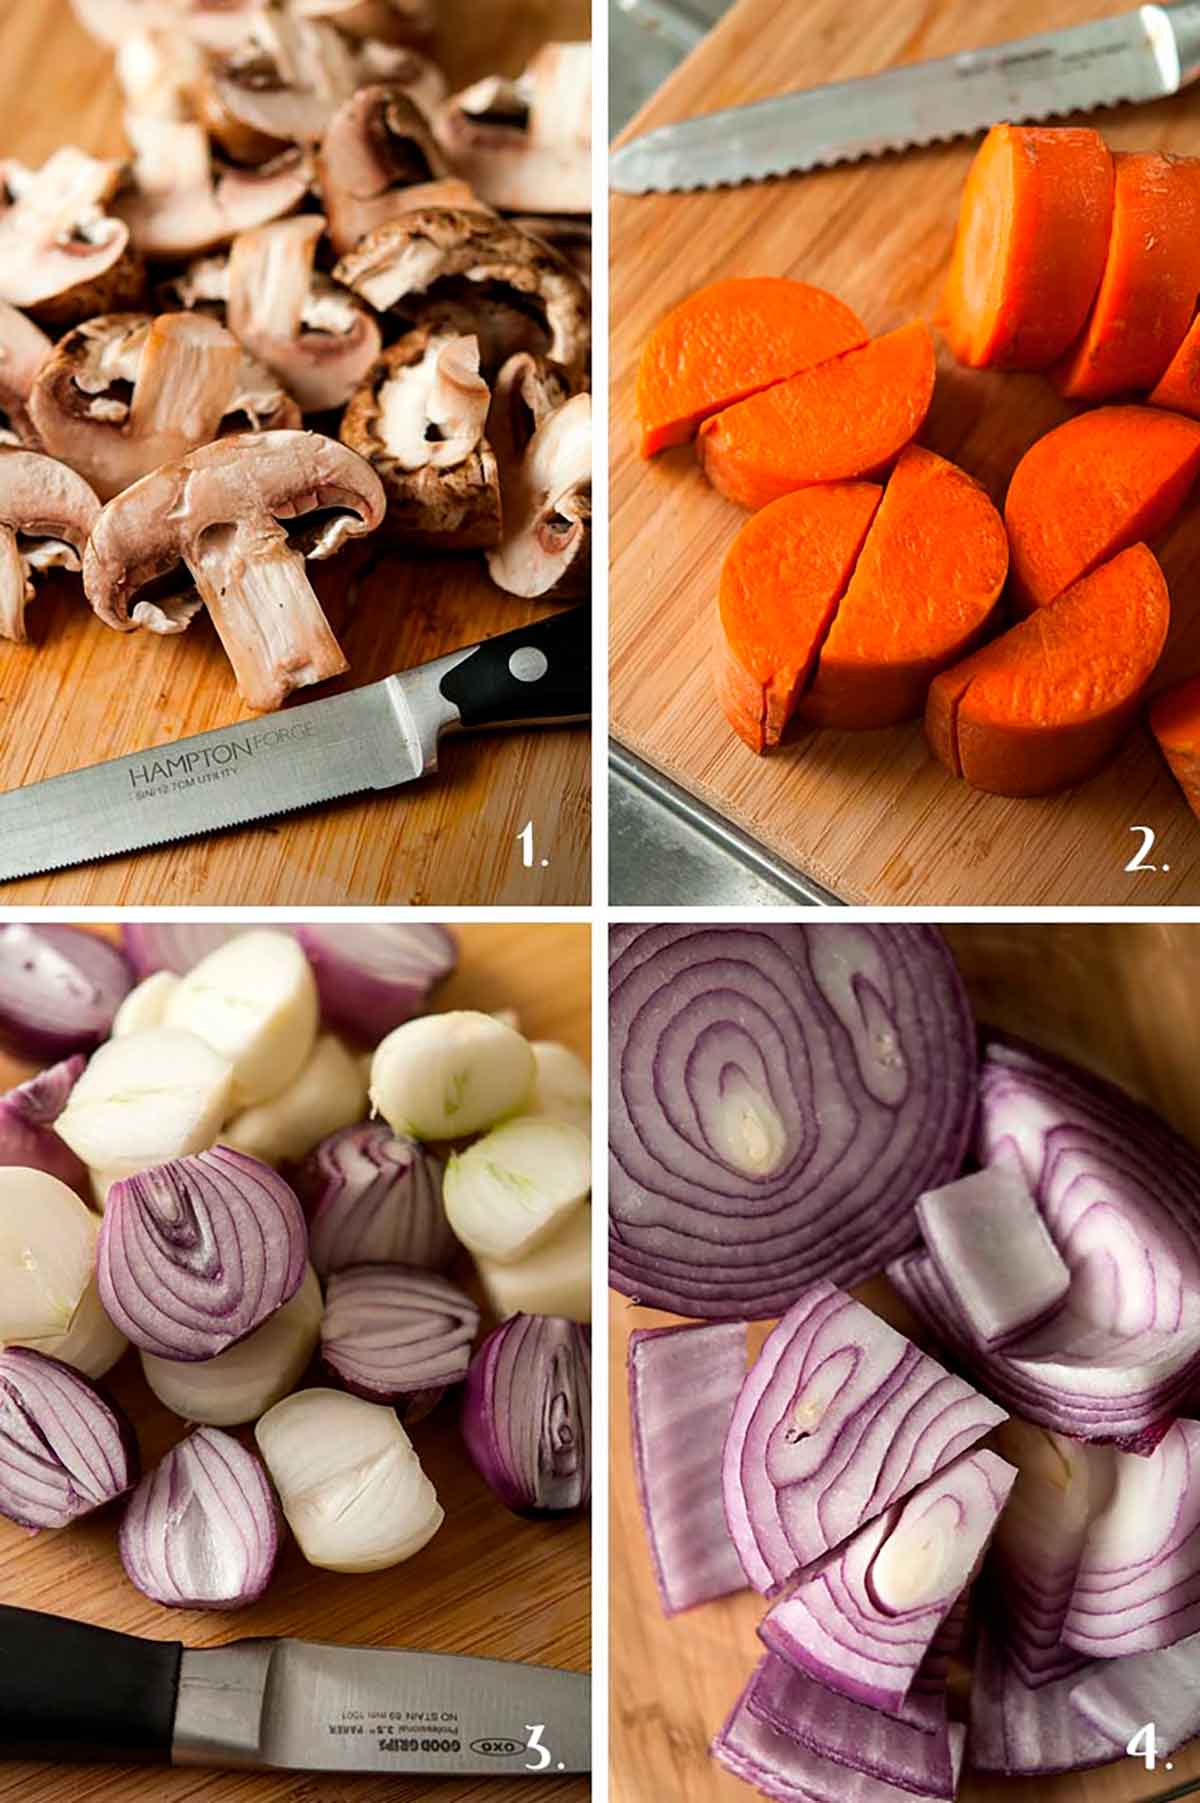 A collage of 4 numbered images showing how to cut mushrooms, carrots and onions.